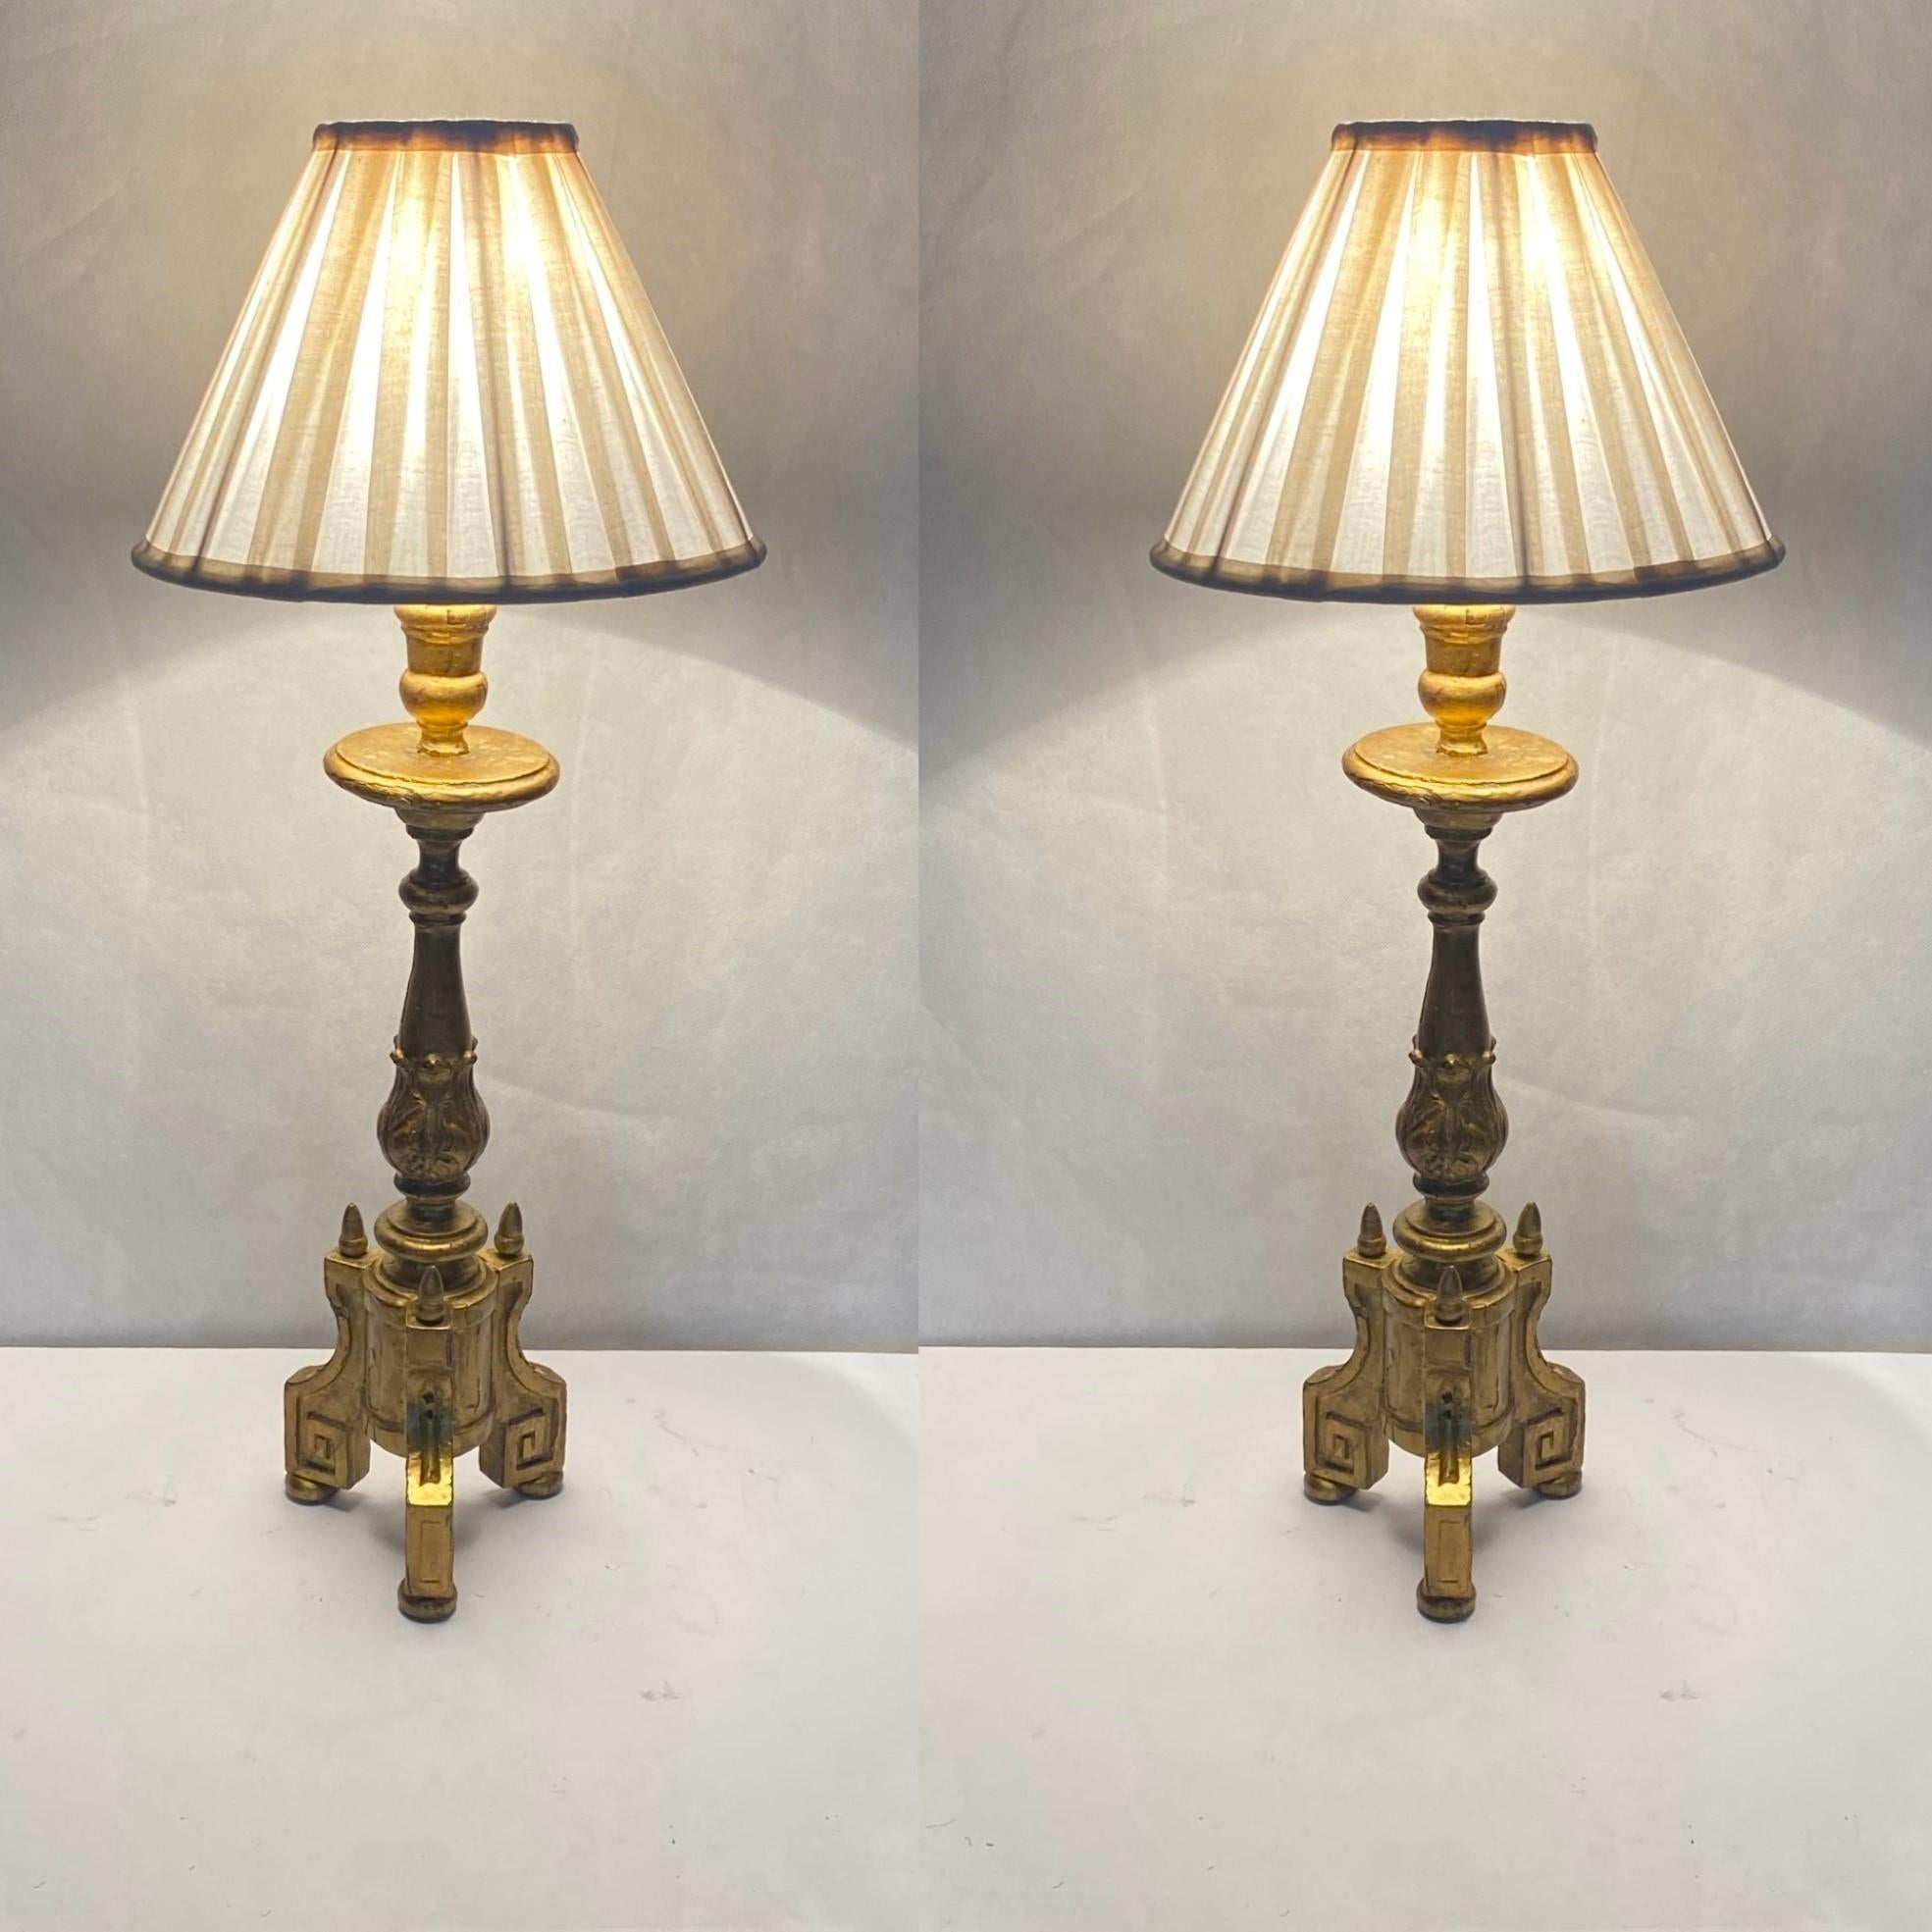 Hand-Carved Pair of 18th Centurty Spanish Carved Gilt Wood Altar Candlesticks Table Lamps For Sale